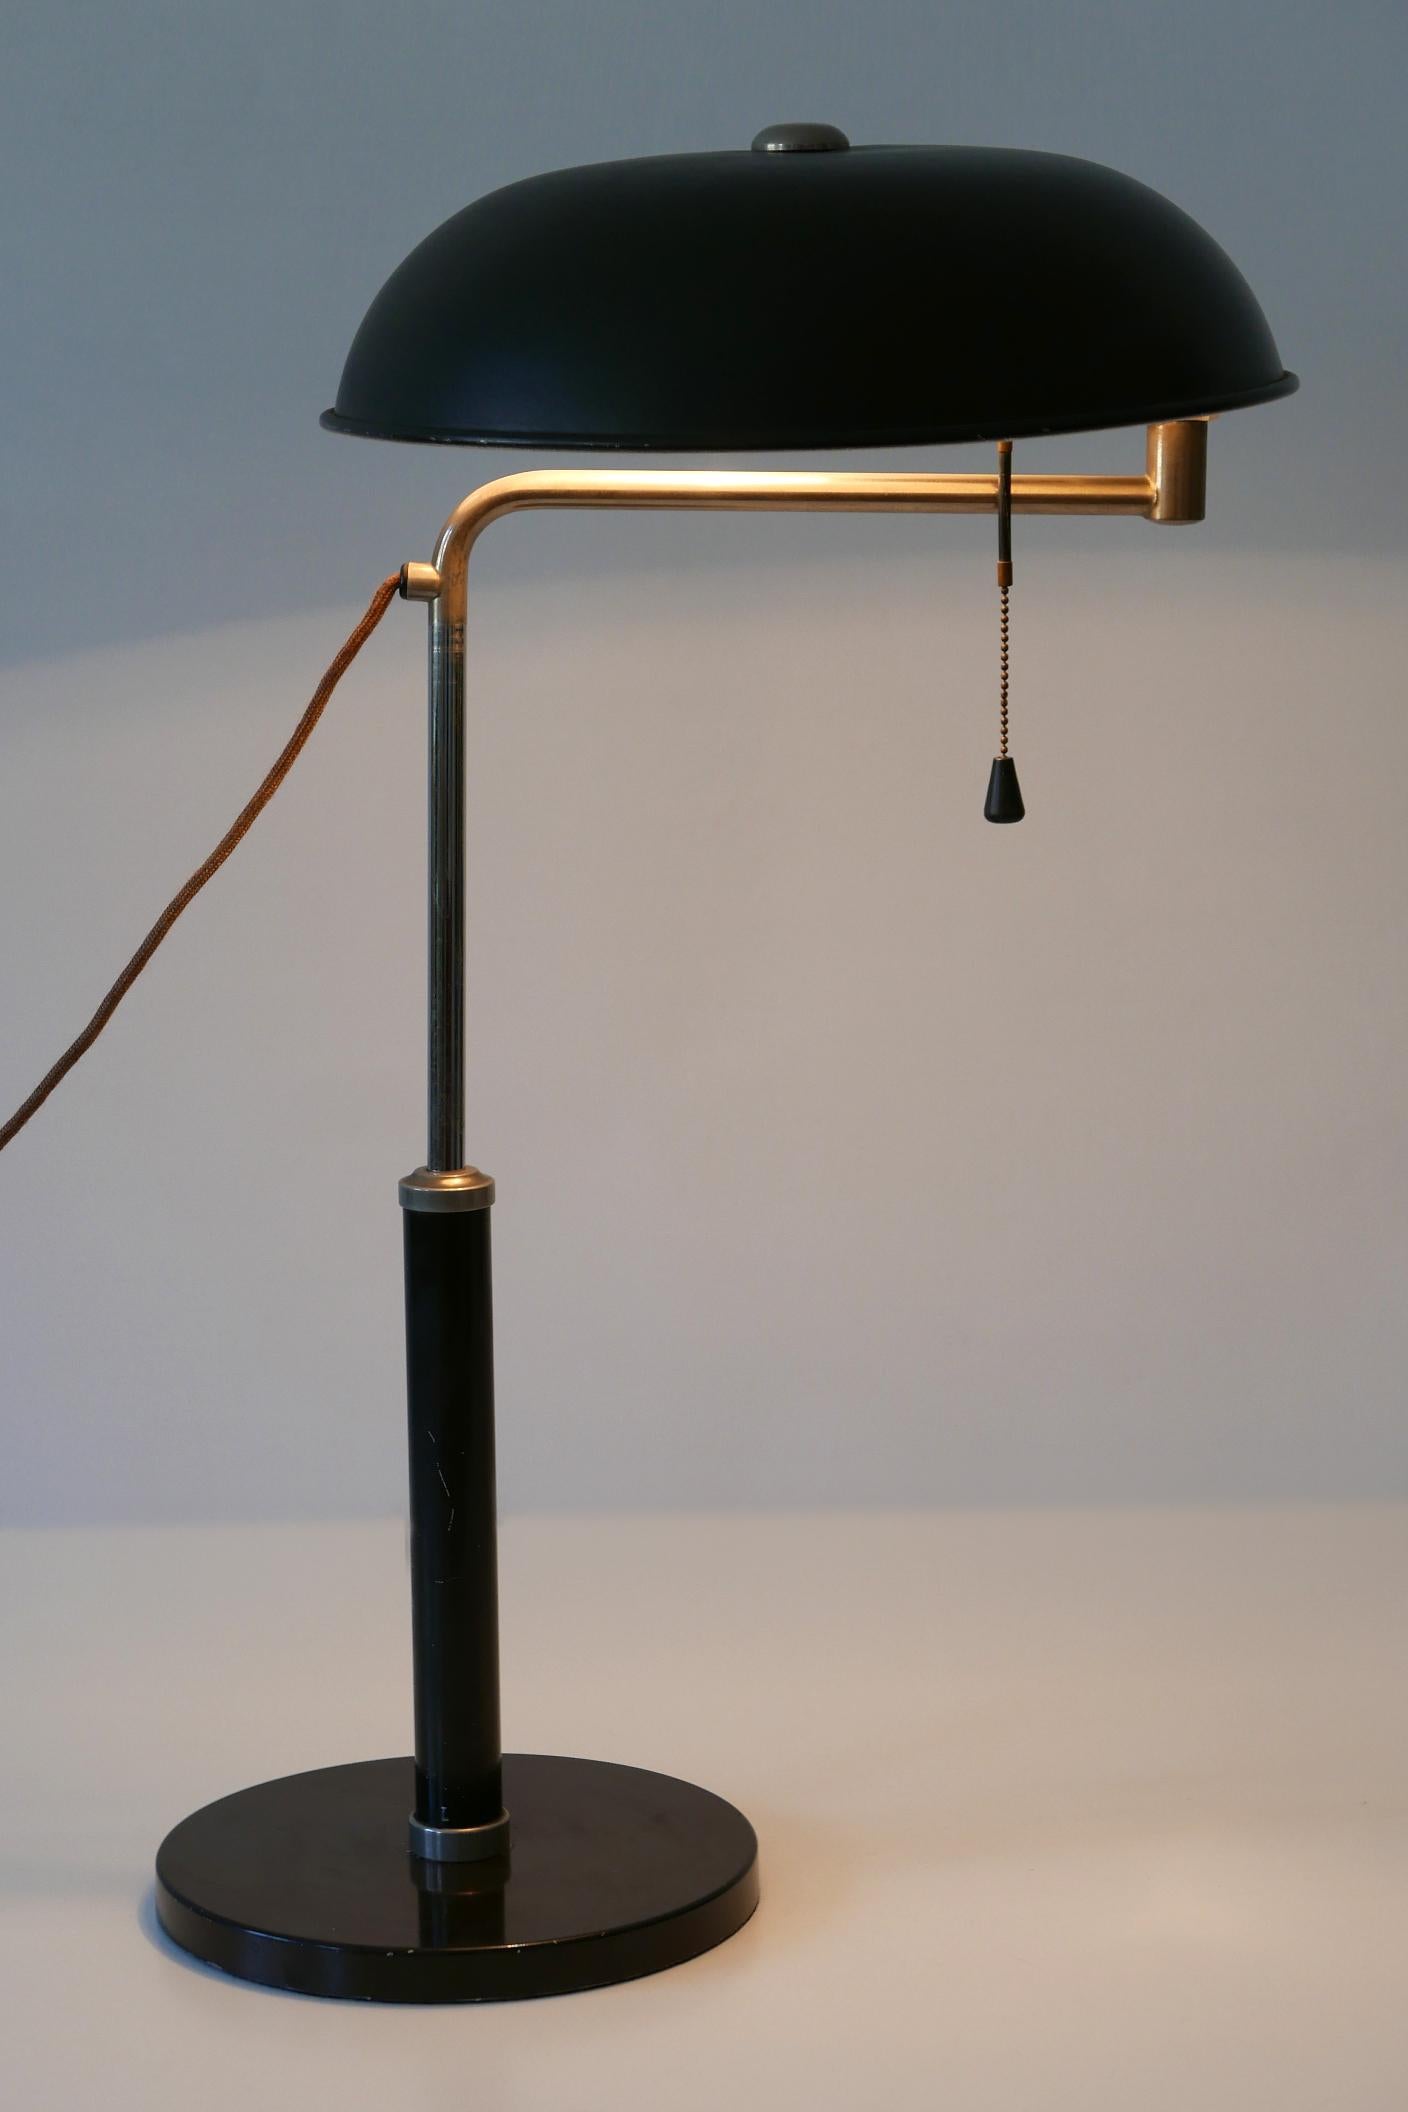 Aluminum Articulated Bauhaus Table Lamp Quick 1500 by Alfred Müller for Amba, 1930s